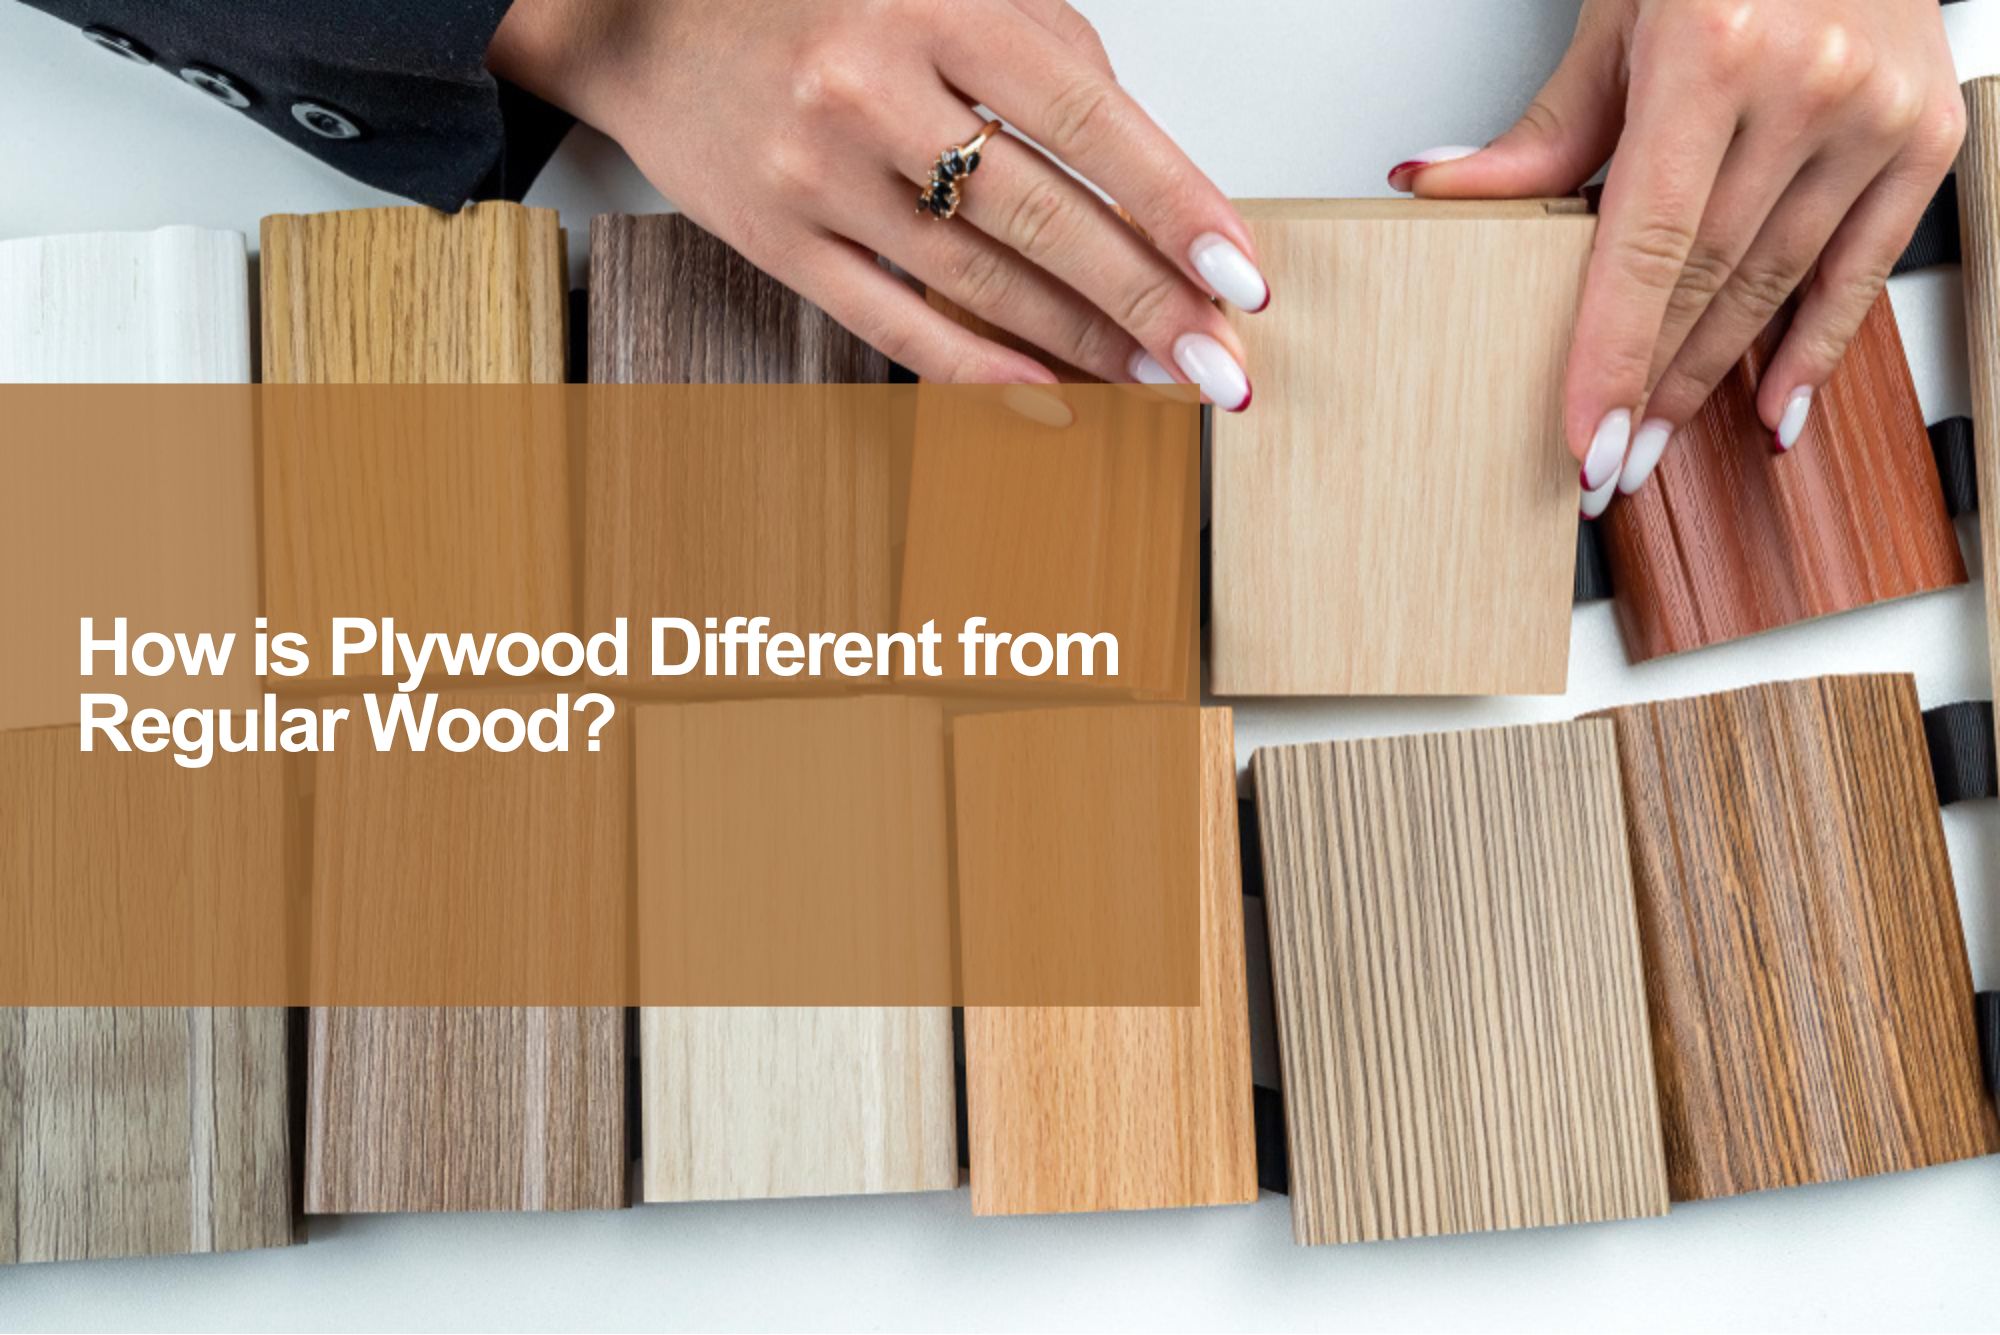 How is Plywood Different from Regular Wood?